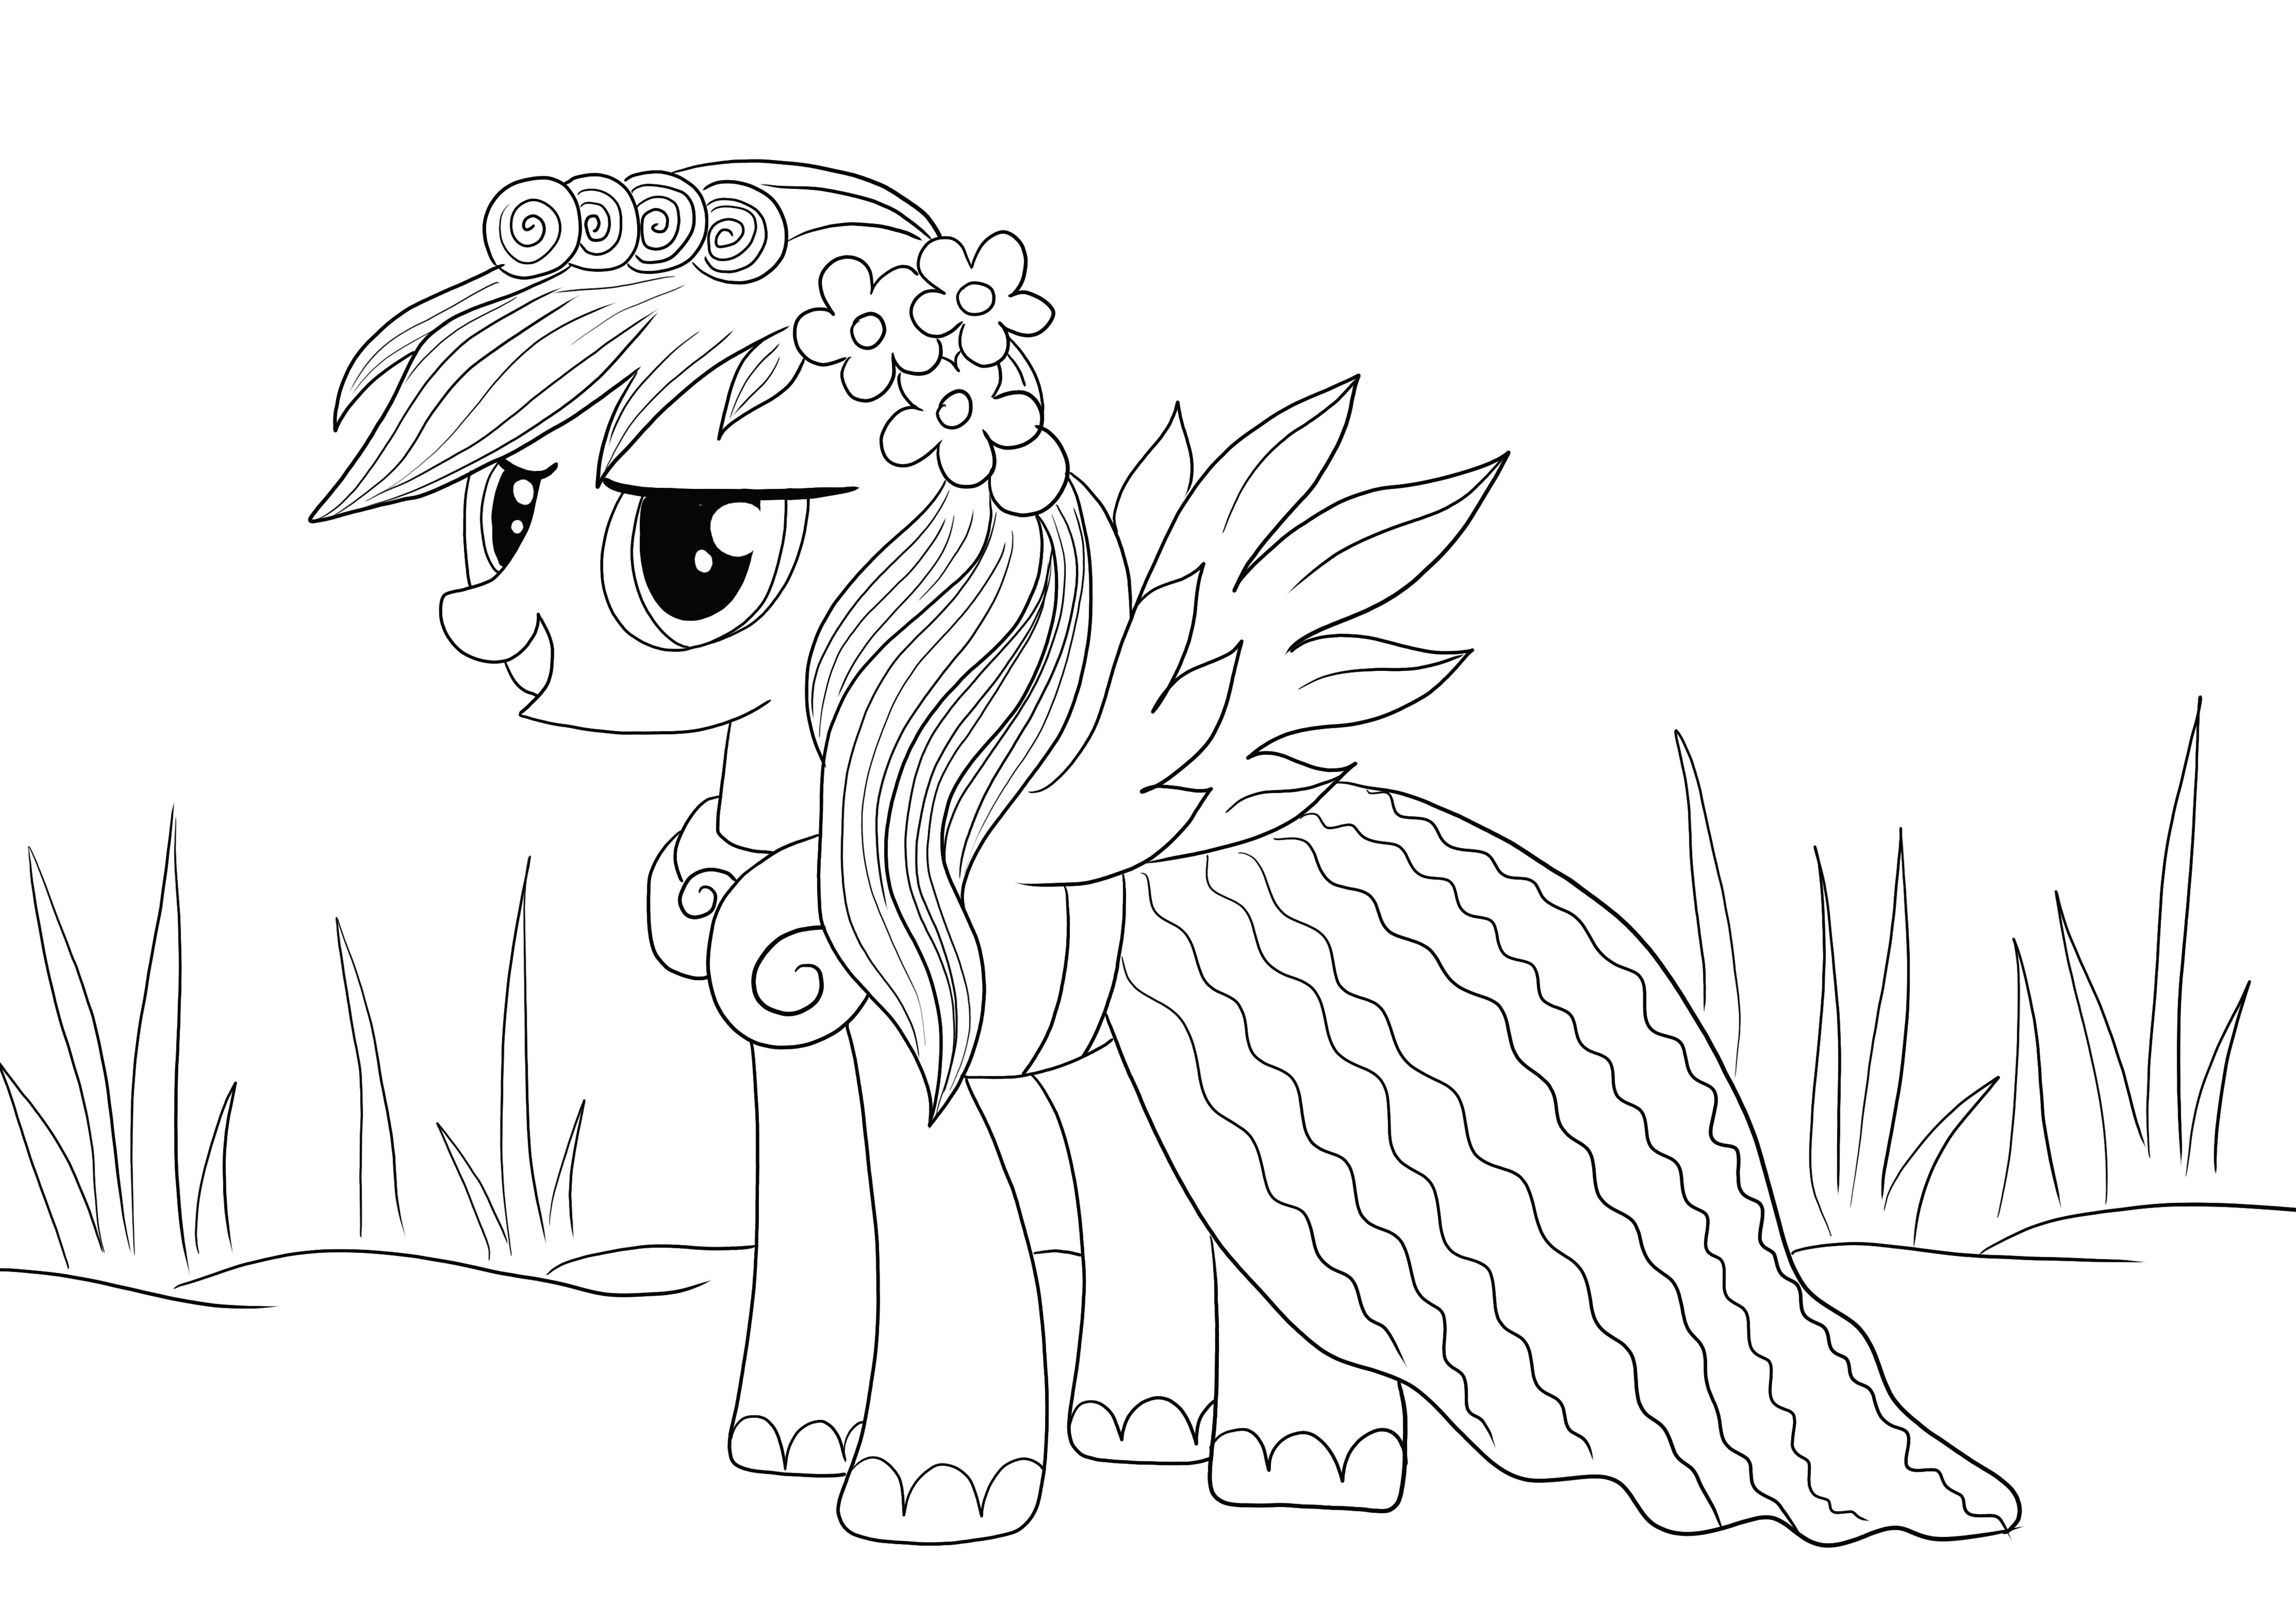 Beautiful Rainbow Dash from Little Pony cartoon free to download and color image